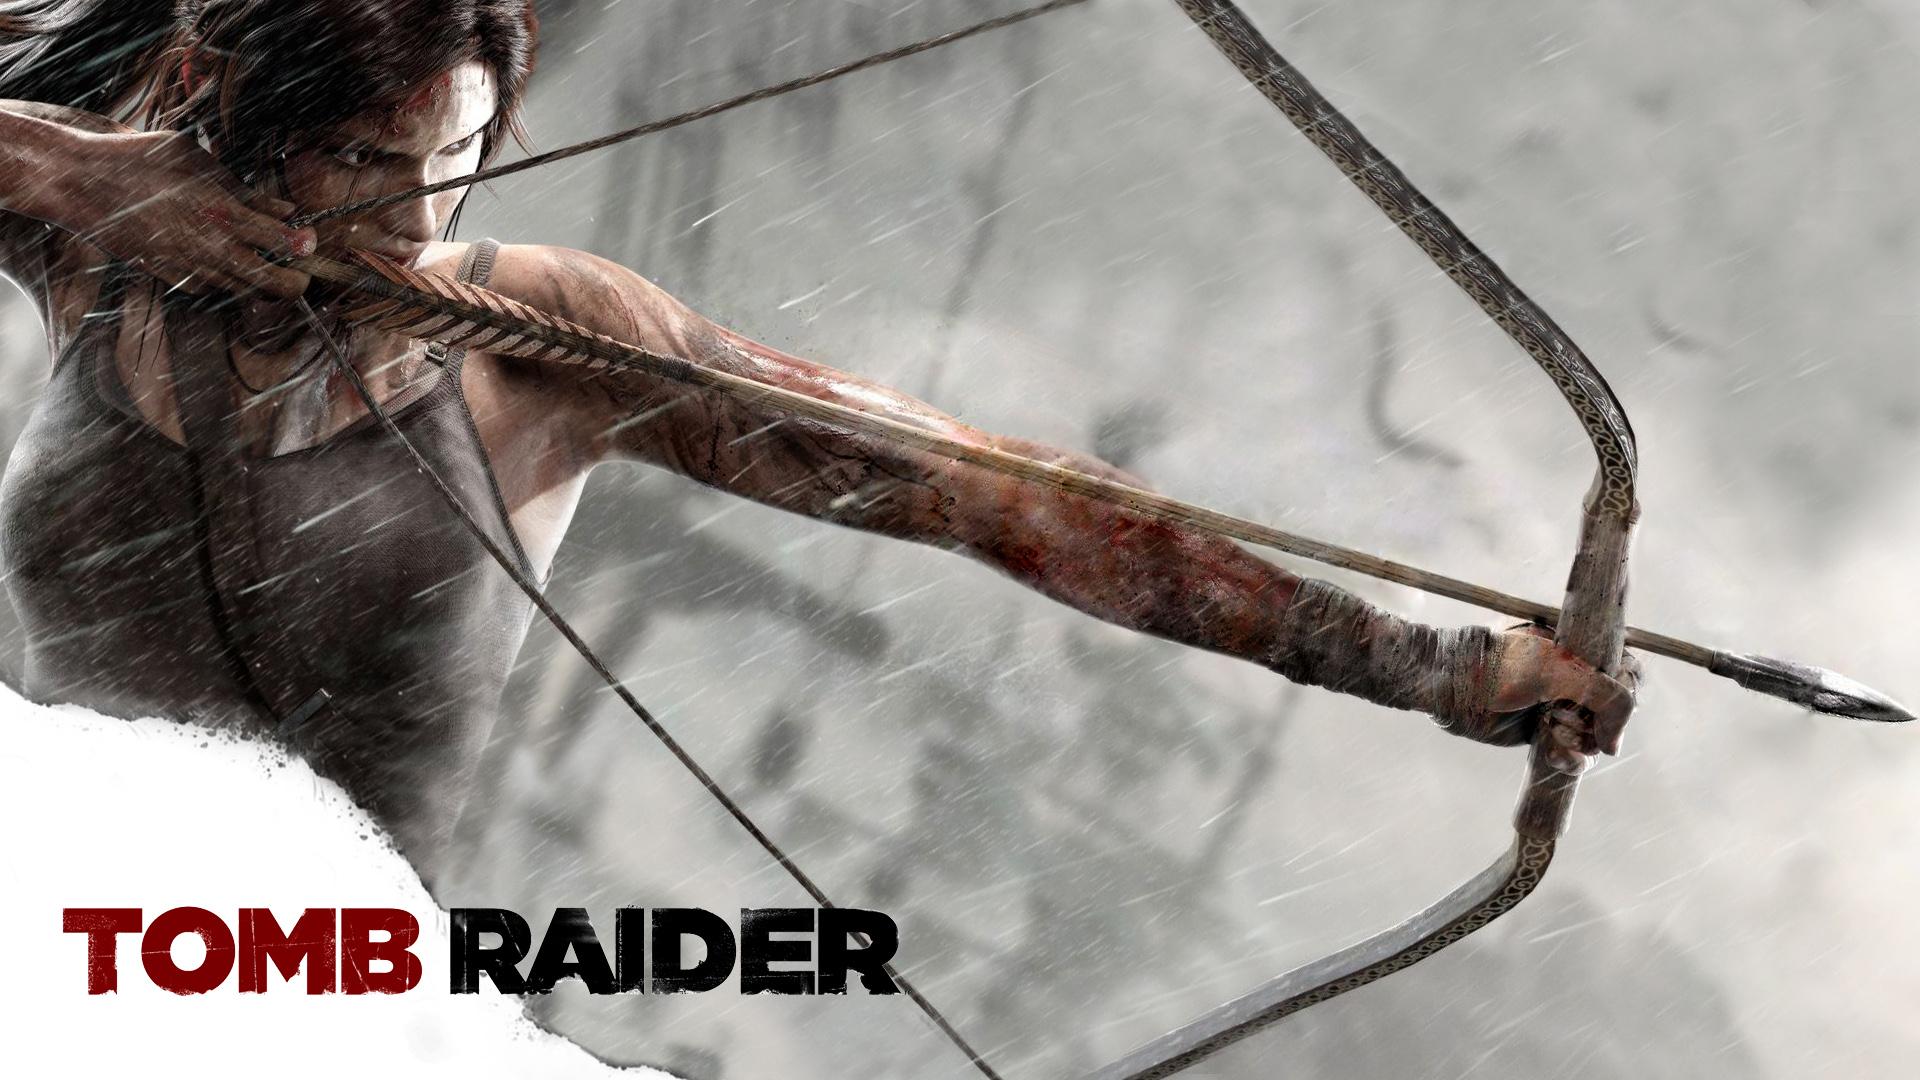 Tomb Raider 2013 Wallpapers 1920x1080 px Free Download